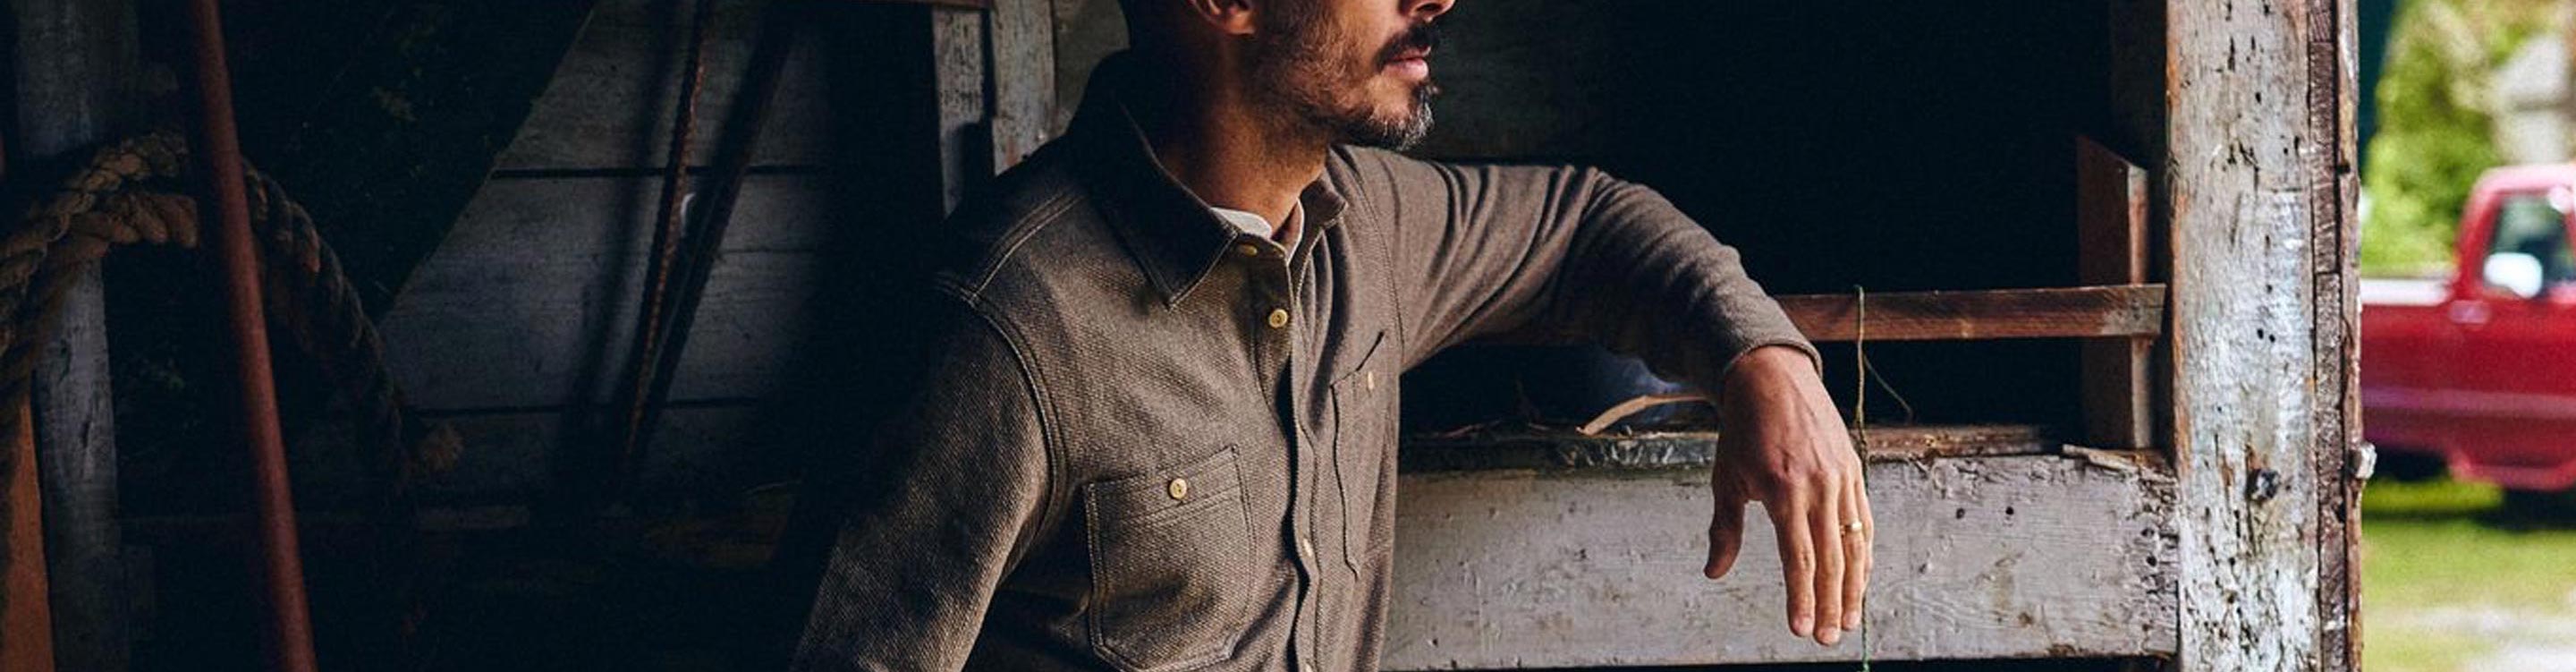 Taylor Twill Knit Stitch for Men - Knit Utility Shirt | Shirts The in